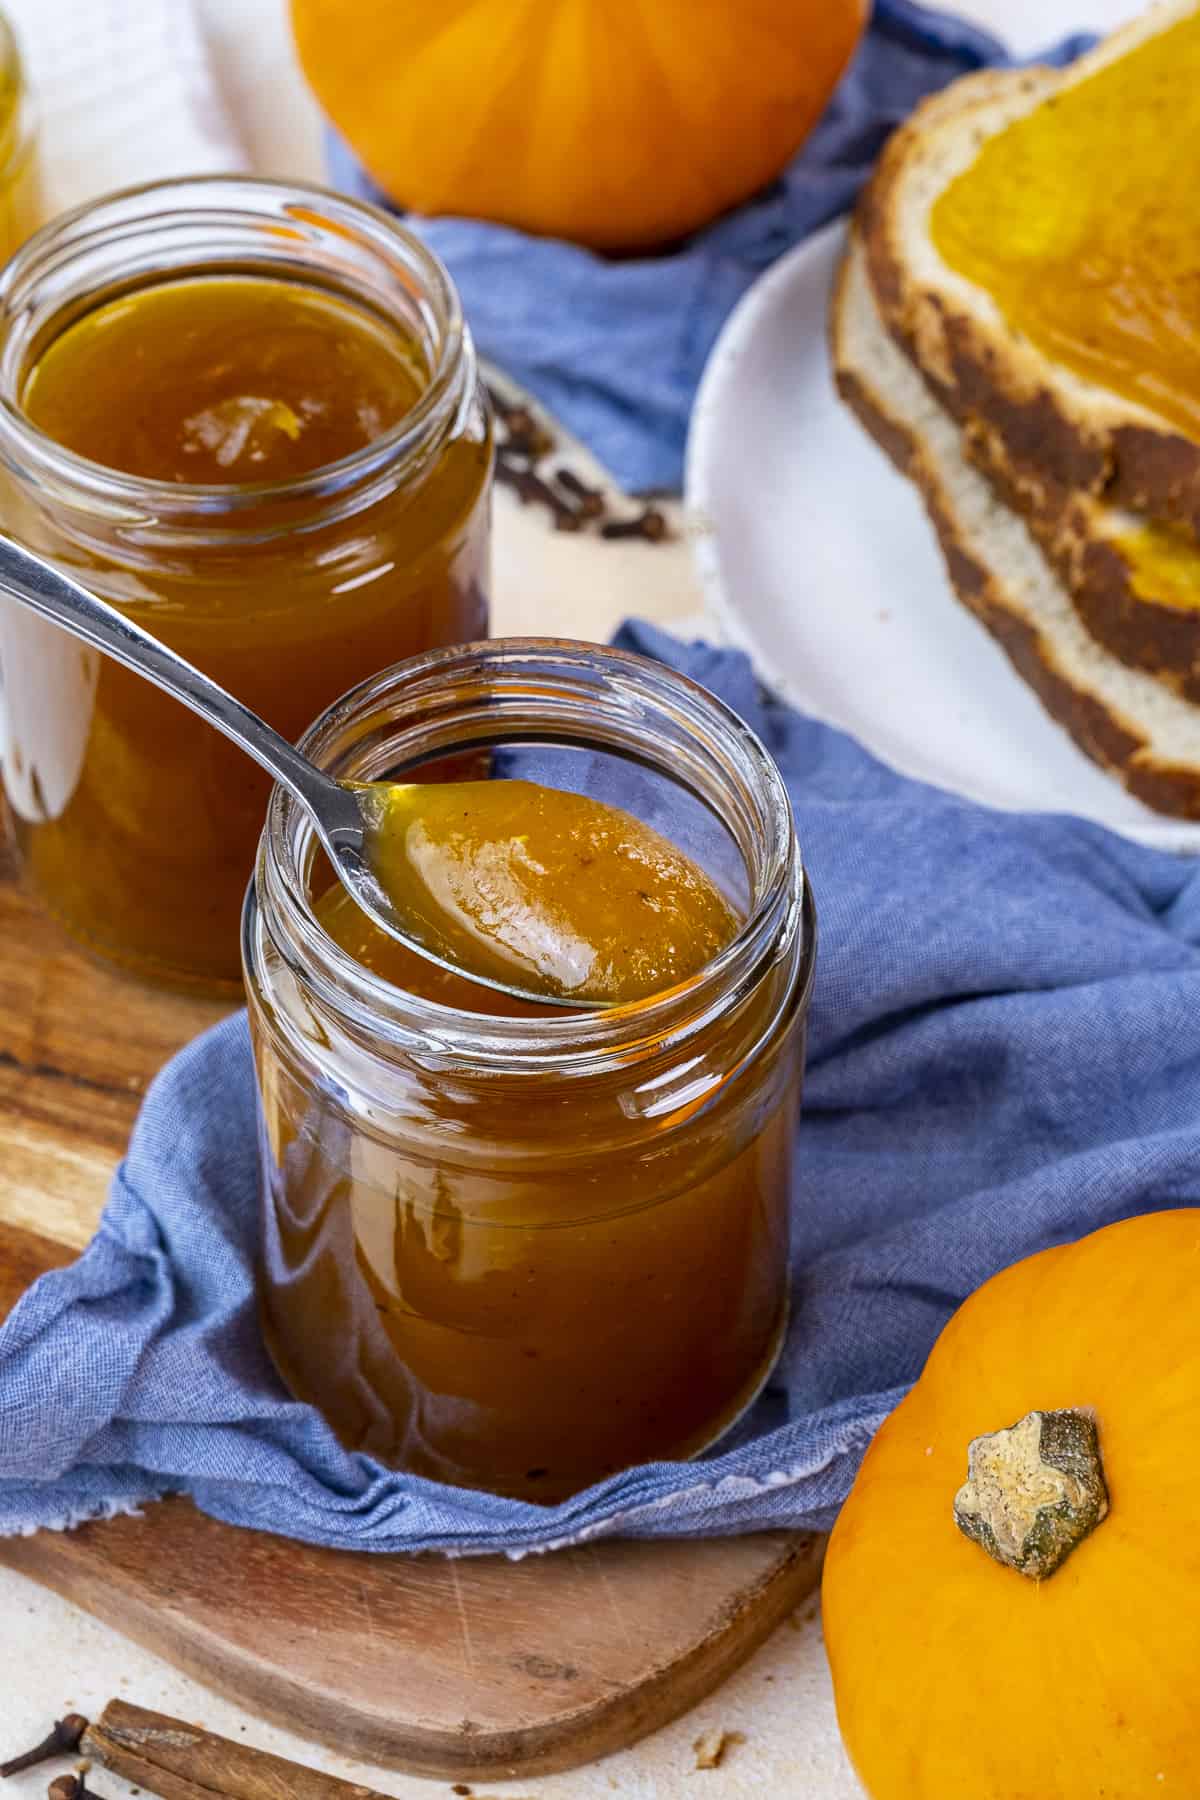 Pumpkin jam in a jar with a spoon inside it, another jar behind it.